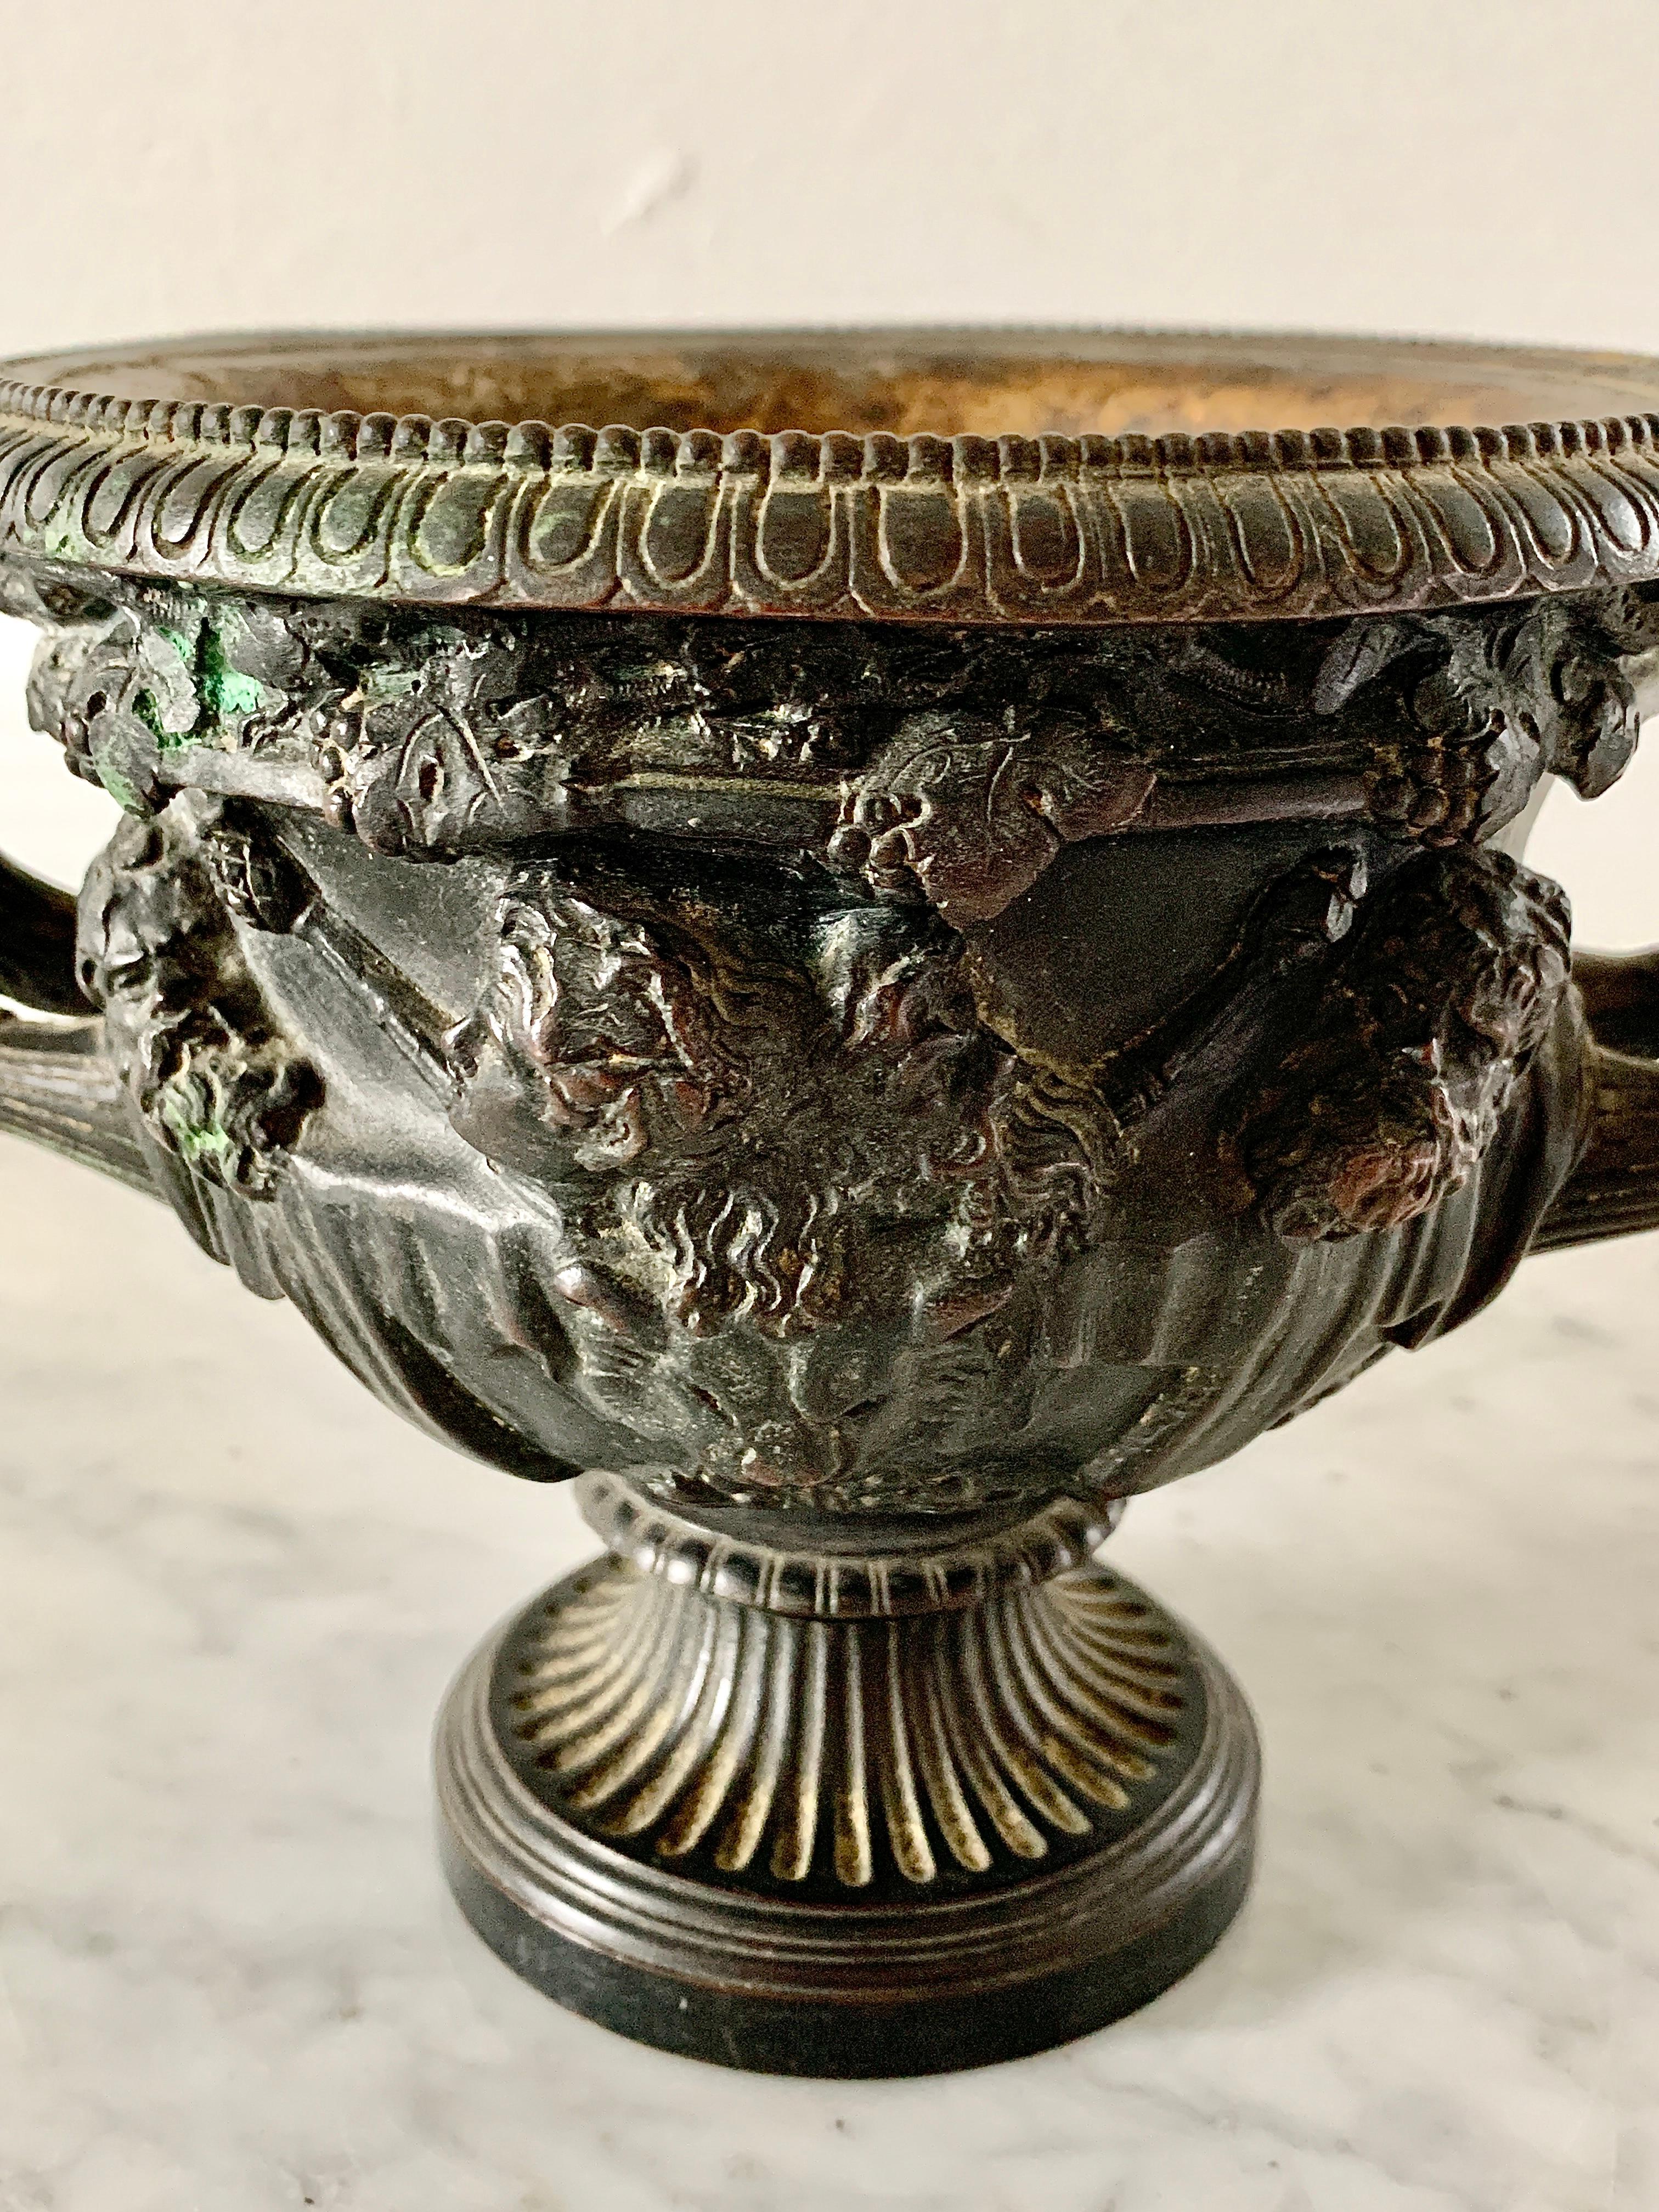 A stunning Grand Tour Neoclassical bronze Warwick vase, urn, or cachepot. This is modeled after an original Roman marble vase, which was discovered in Hadrian's Villa, Tivoli by Gavin Hamilton, in 1771. The beauty of this vase became a symbol of